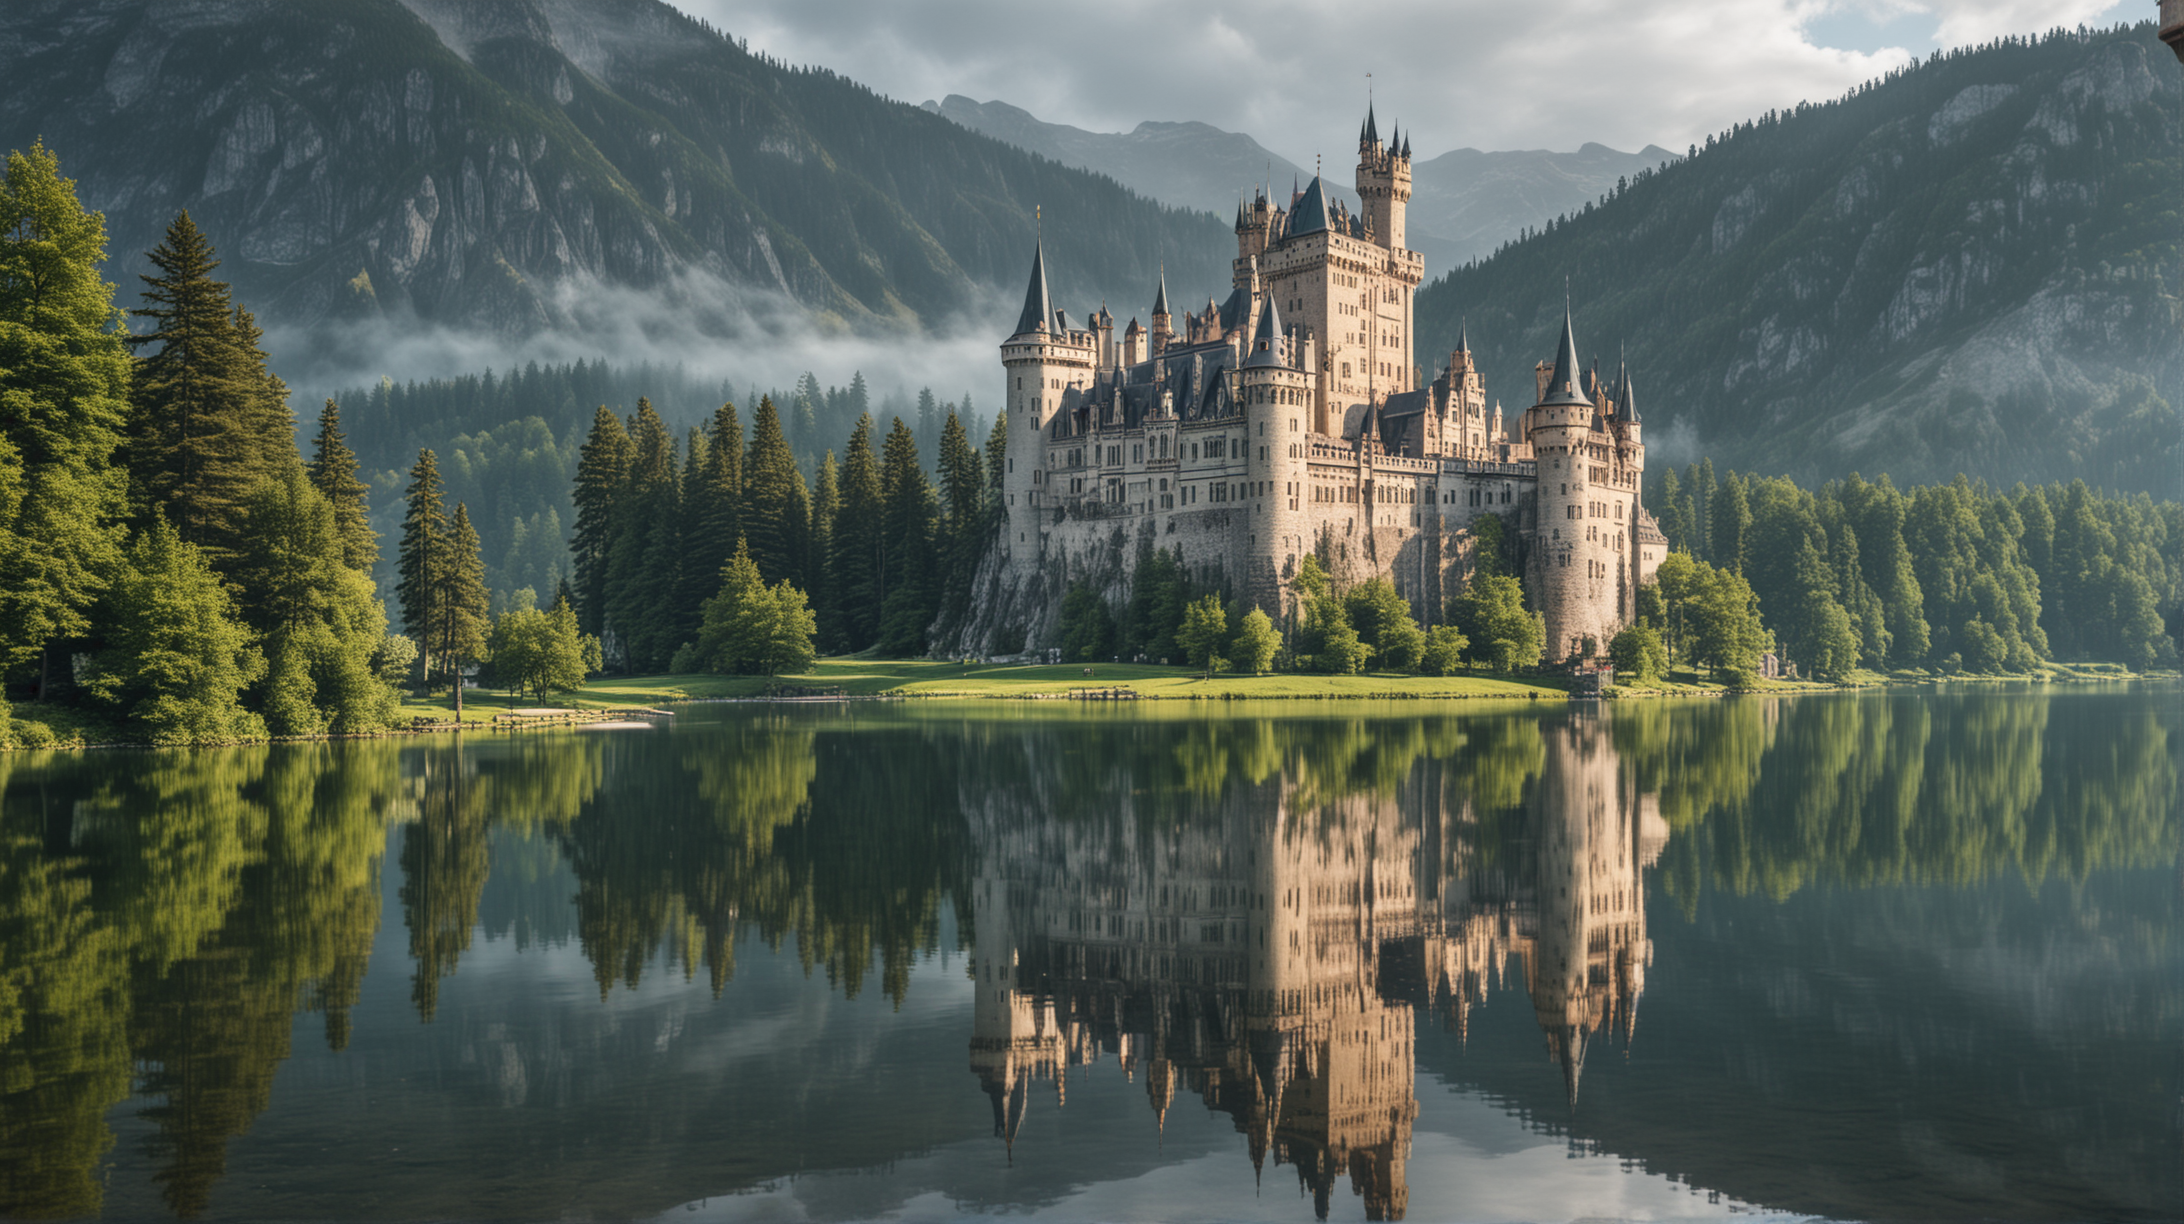 A majestic castle reflecting perfectly on a lake.